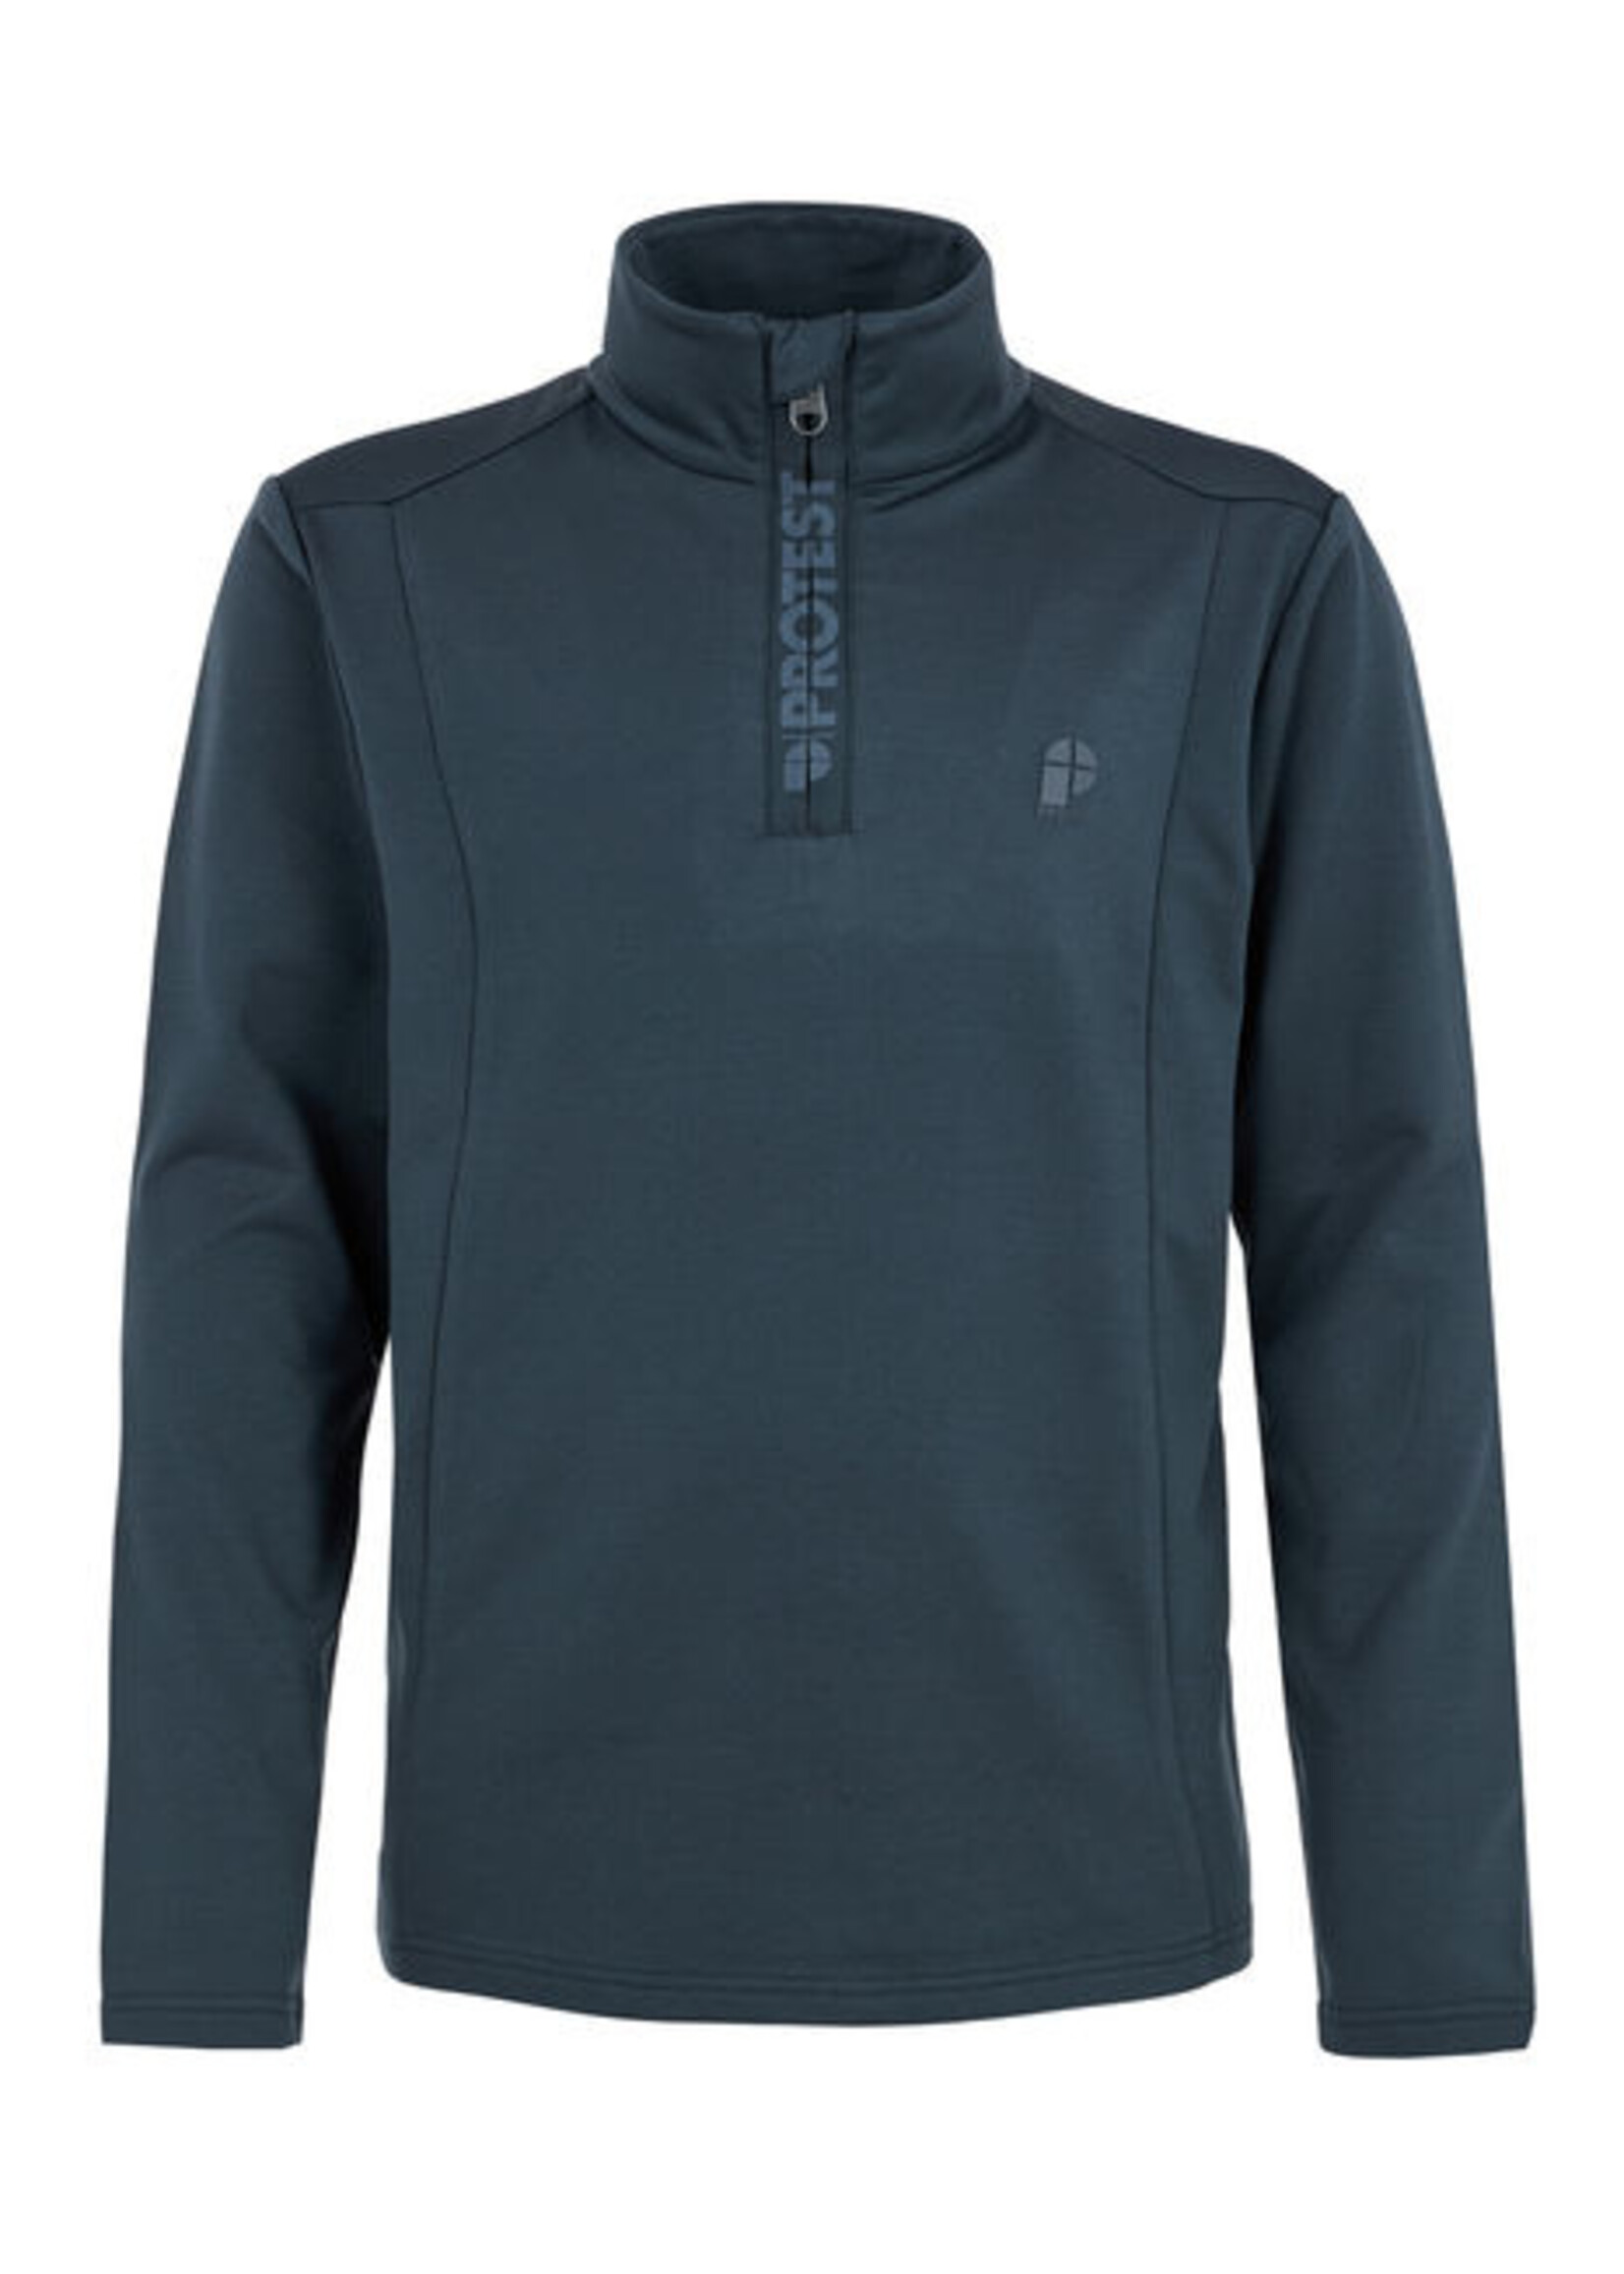 PROTEST  WILLOWY JR 1/4 zip top-Blue Nights